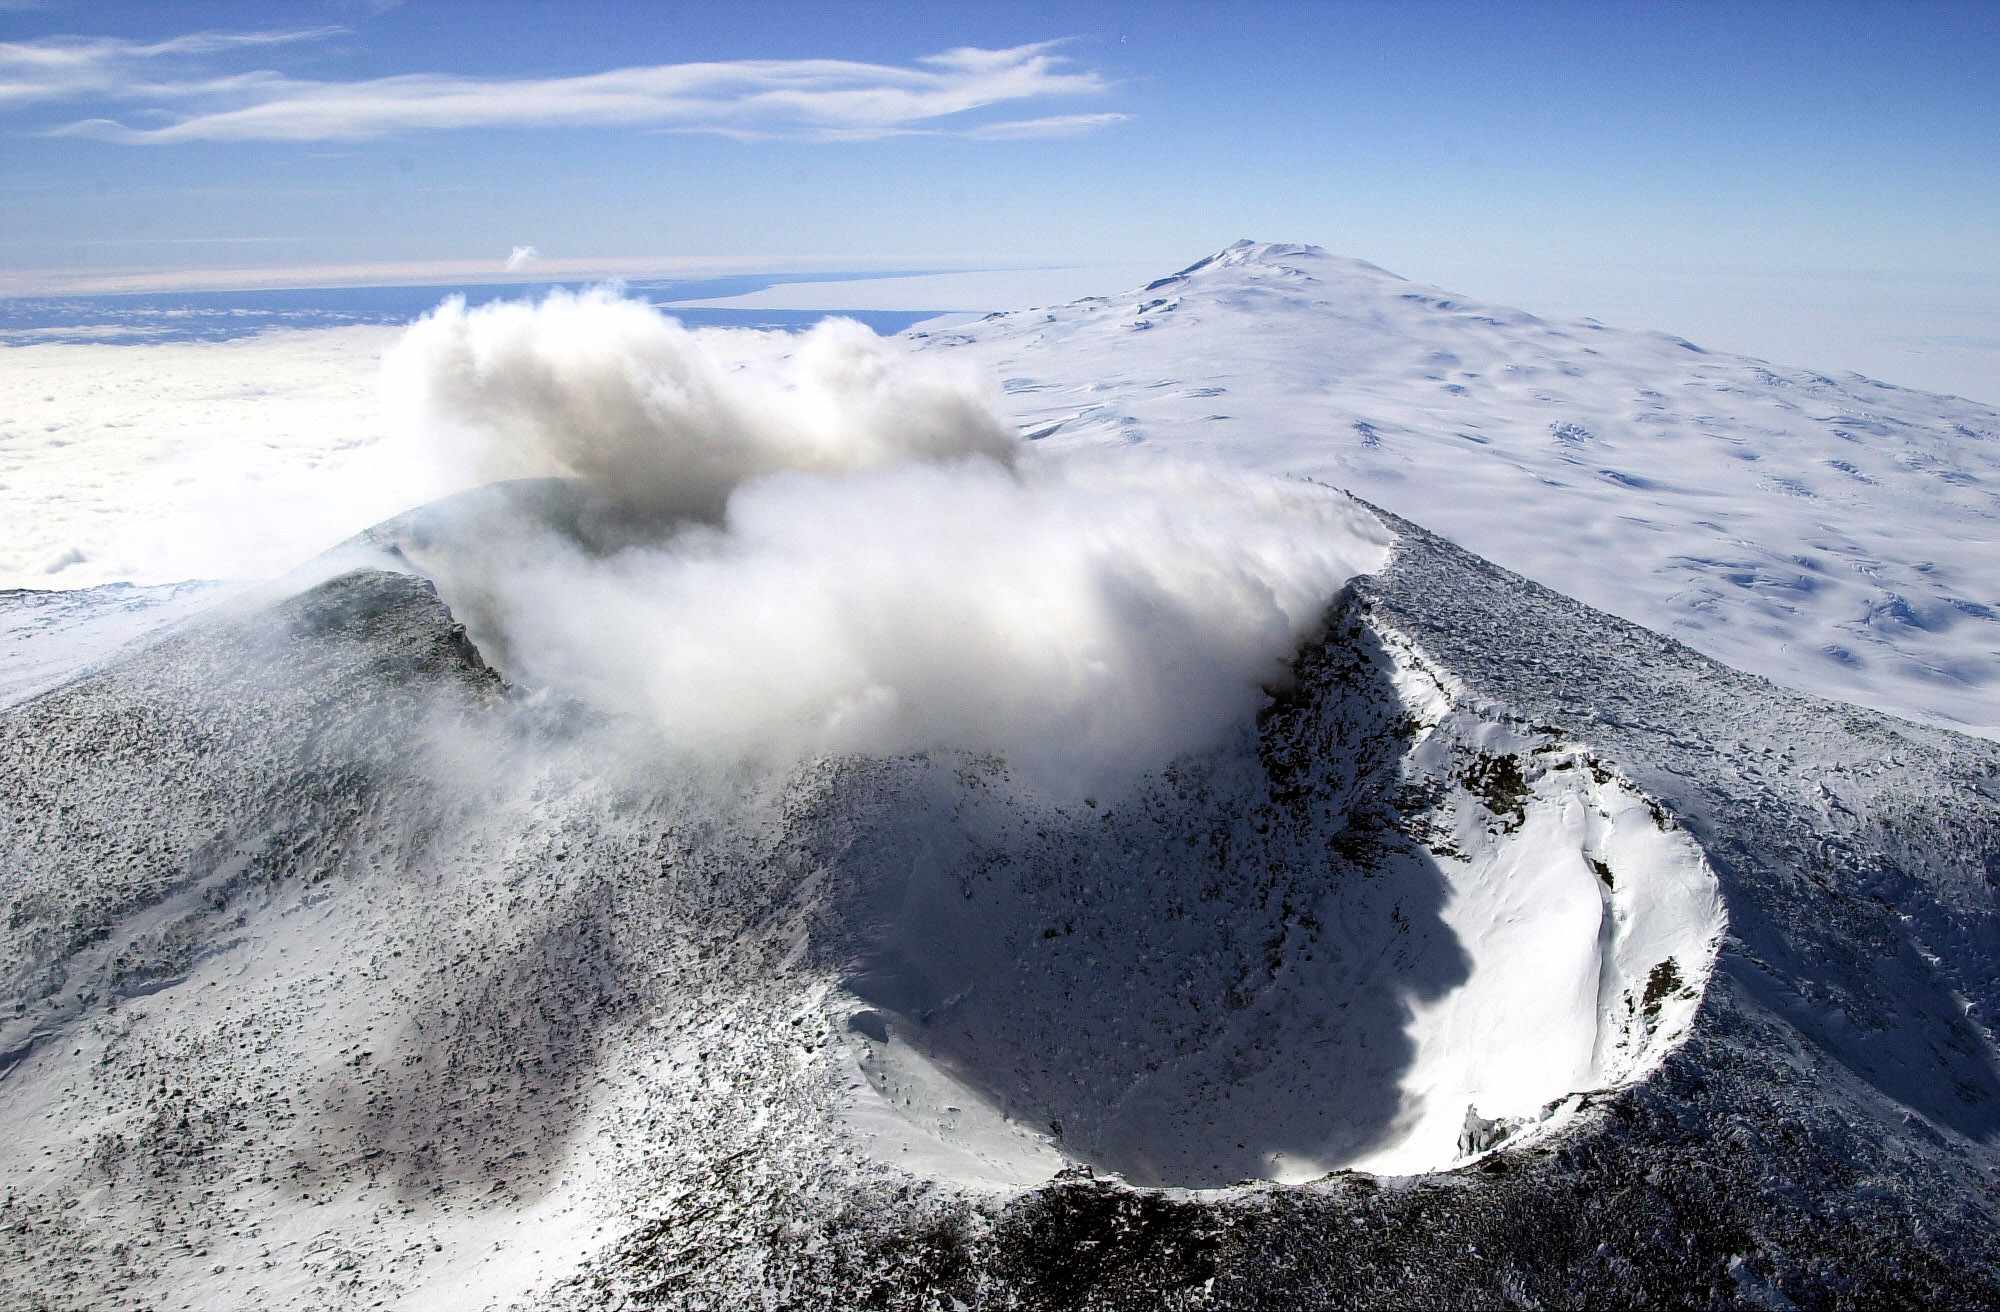 Aerial view of Mount Erebus craters in the foreground with Mount Terror in the background, Ross Island, Antarctica